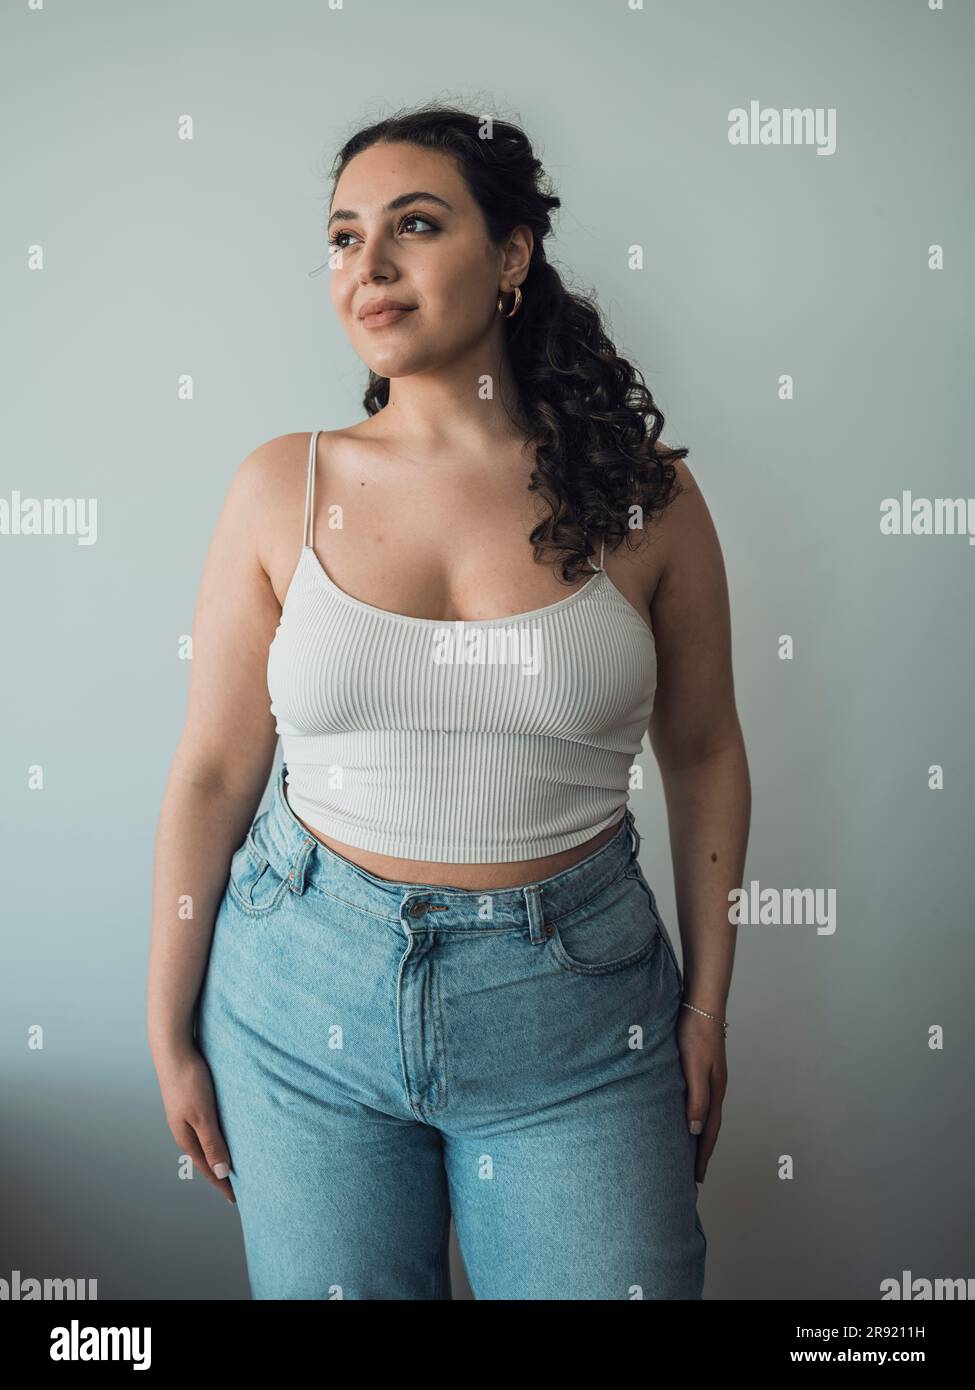 Thoughtful curvy woman standing in front of wall Stock Photo - Alamy